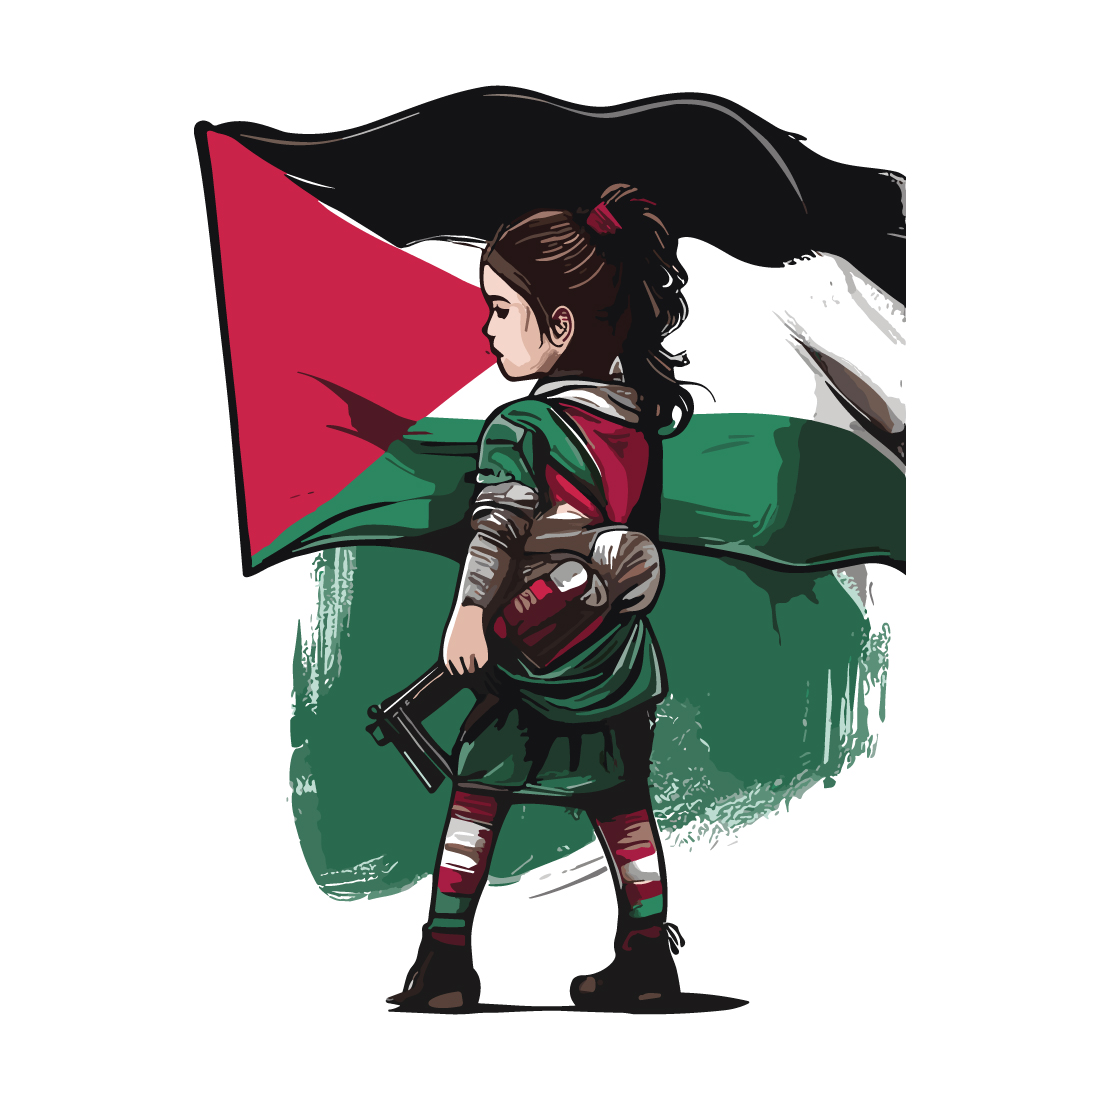 Professional t-shirt depicting the suffering and struggle of Palestine with letter or flag preview image.